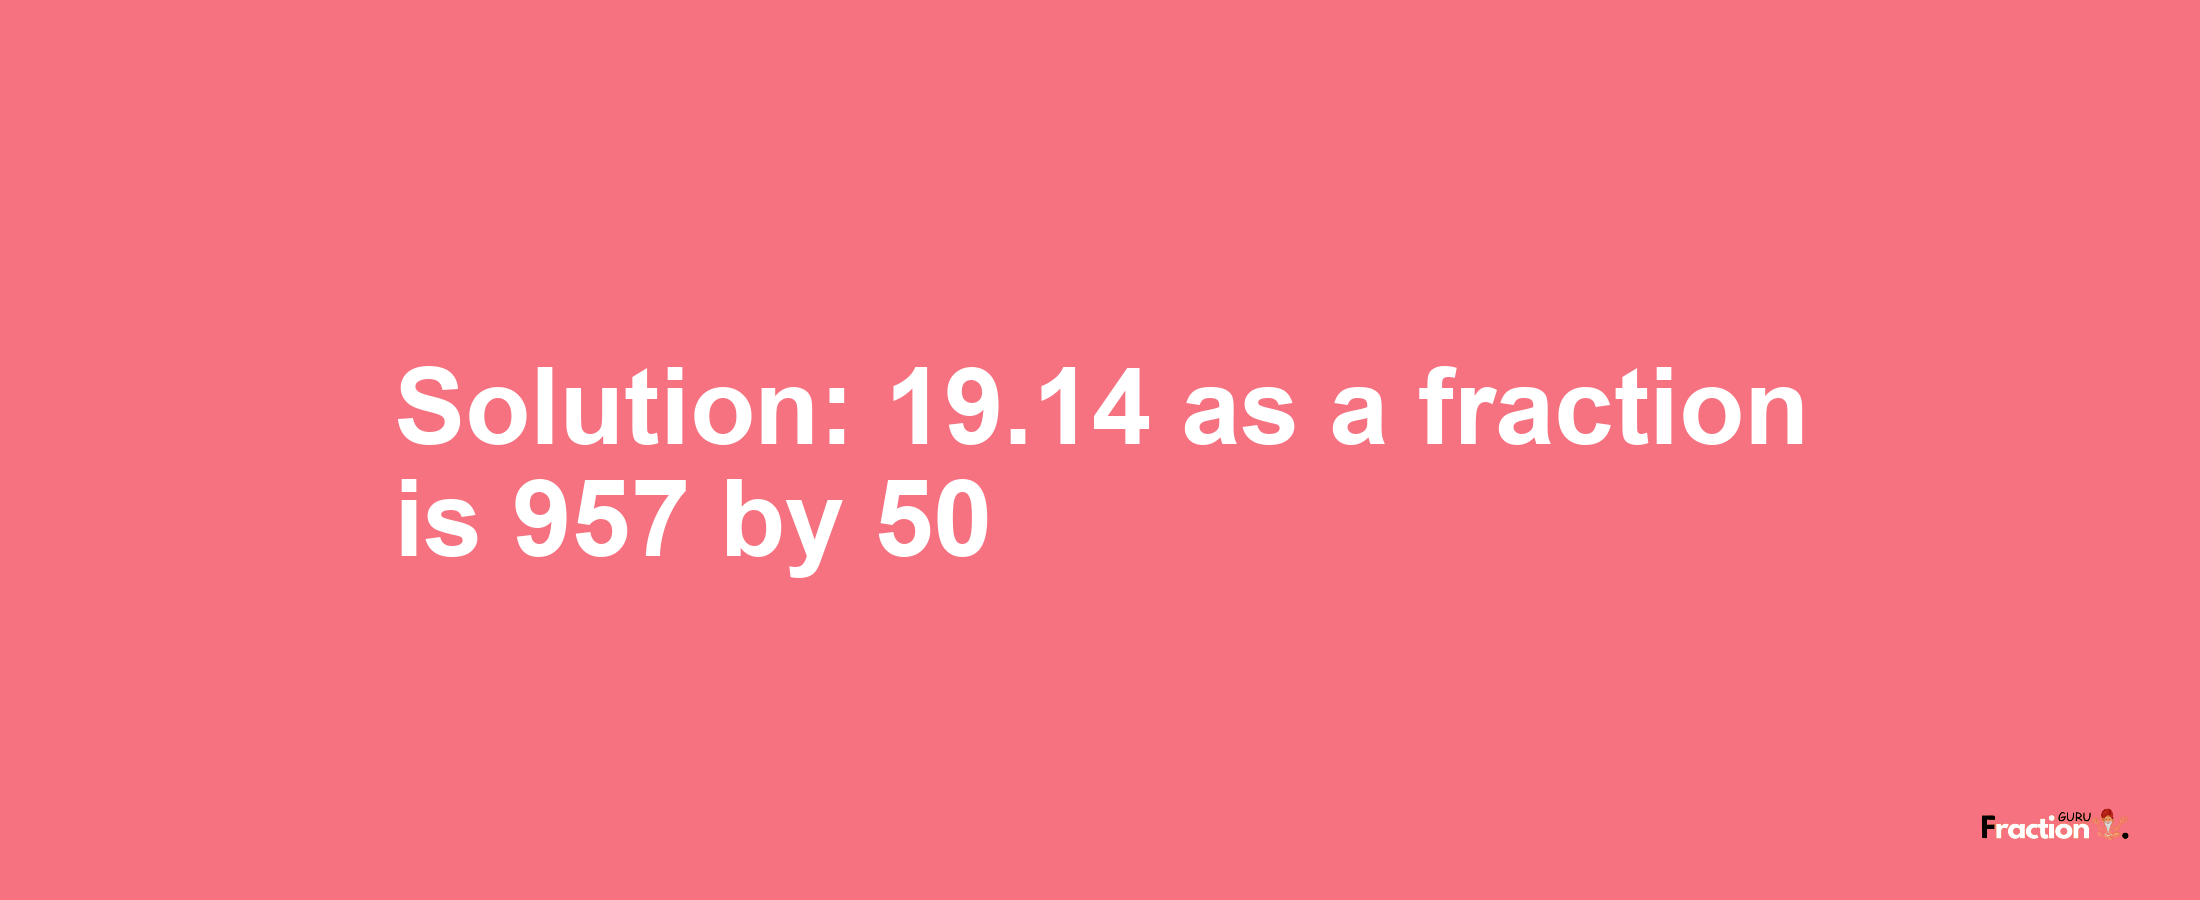 Solution:19.14 as a fraction is 957/50